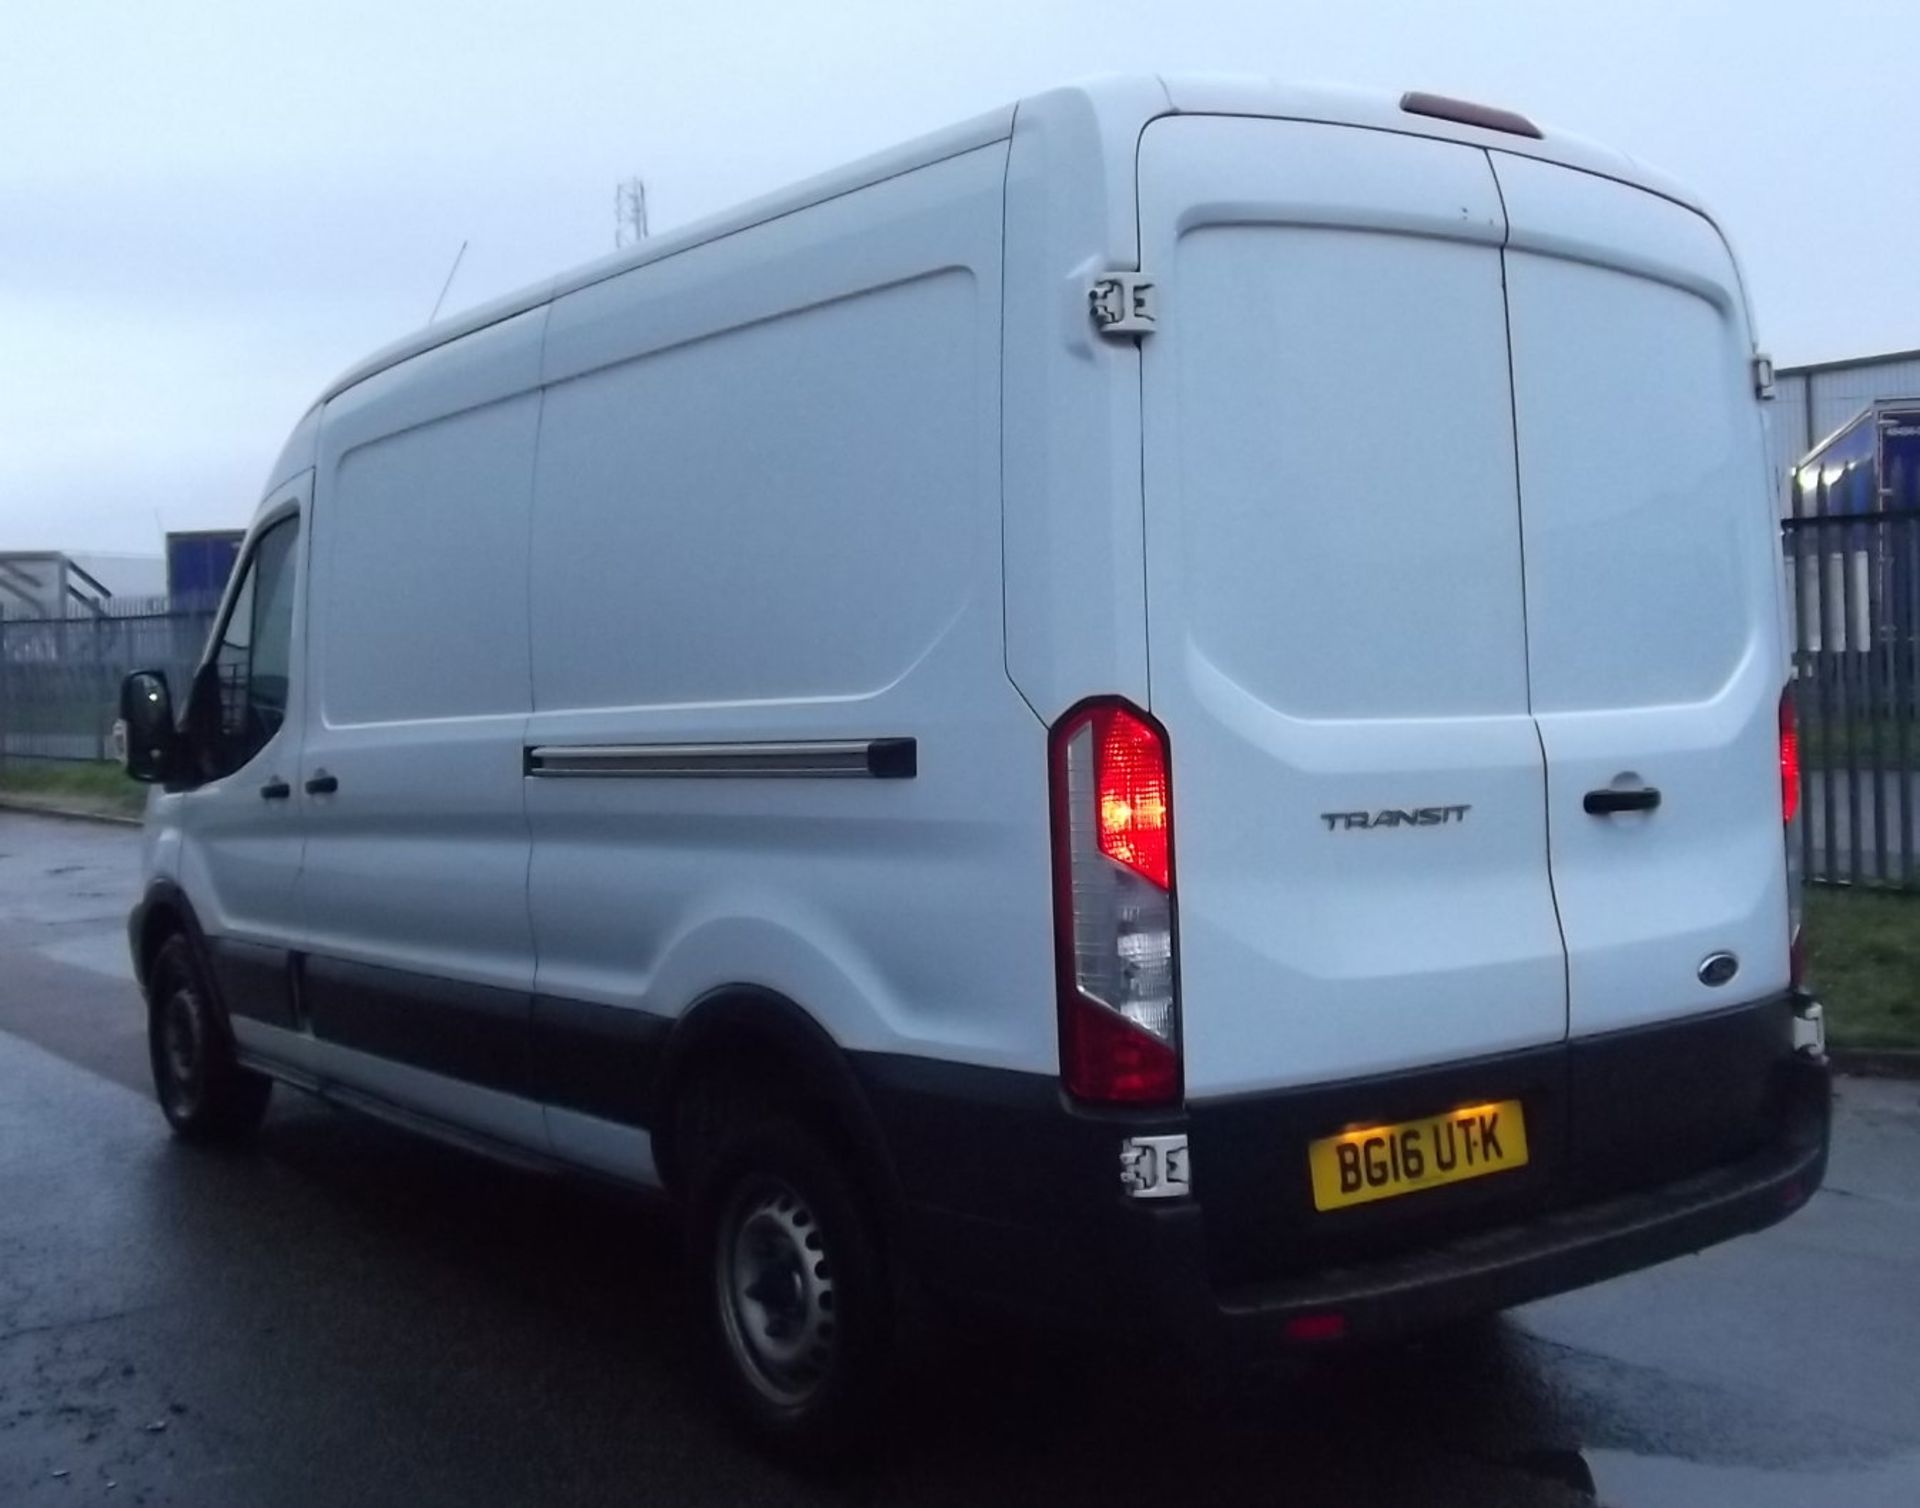 2016 Ford Transit 350 2.2 TDCi 125ps H2L3 Panel Van - CL505 - Location: Corby, Northamptonshire - Image 12 of 15